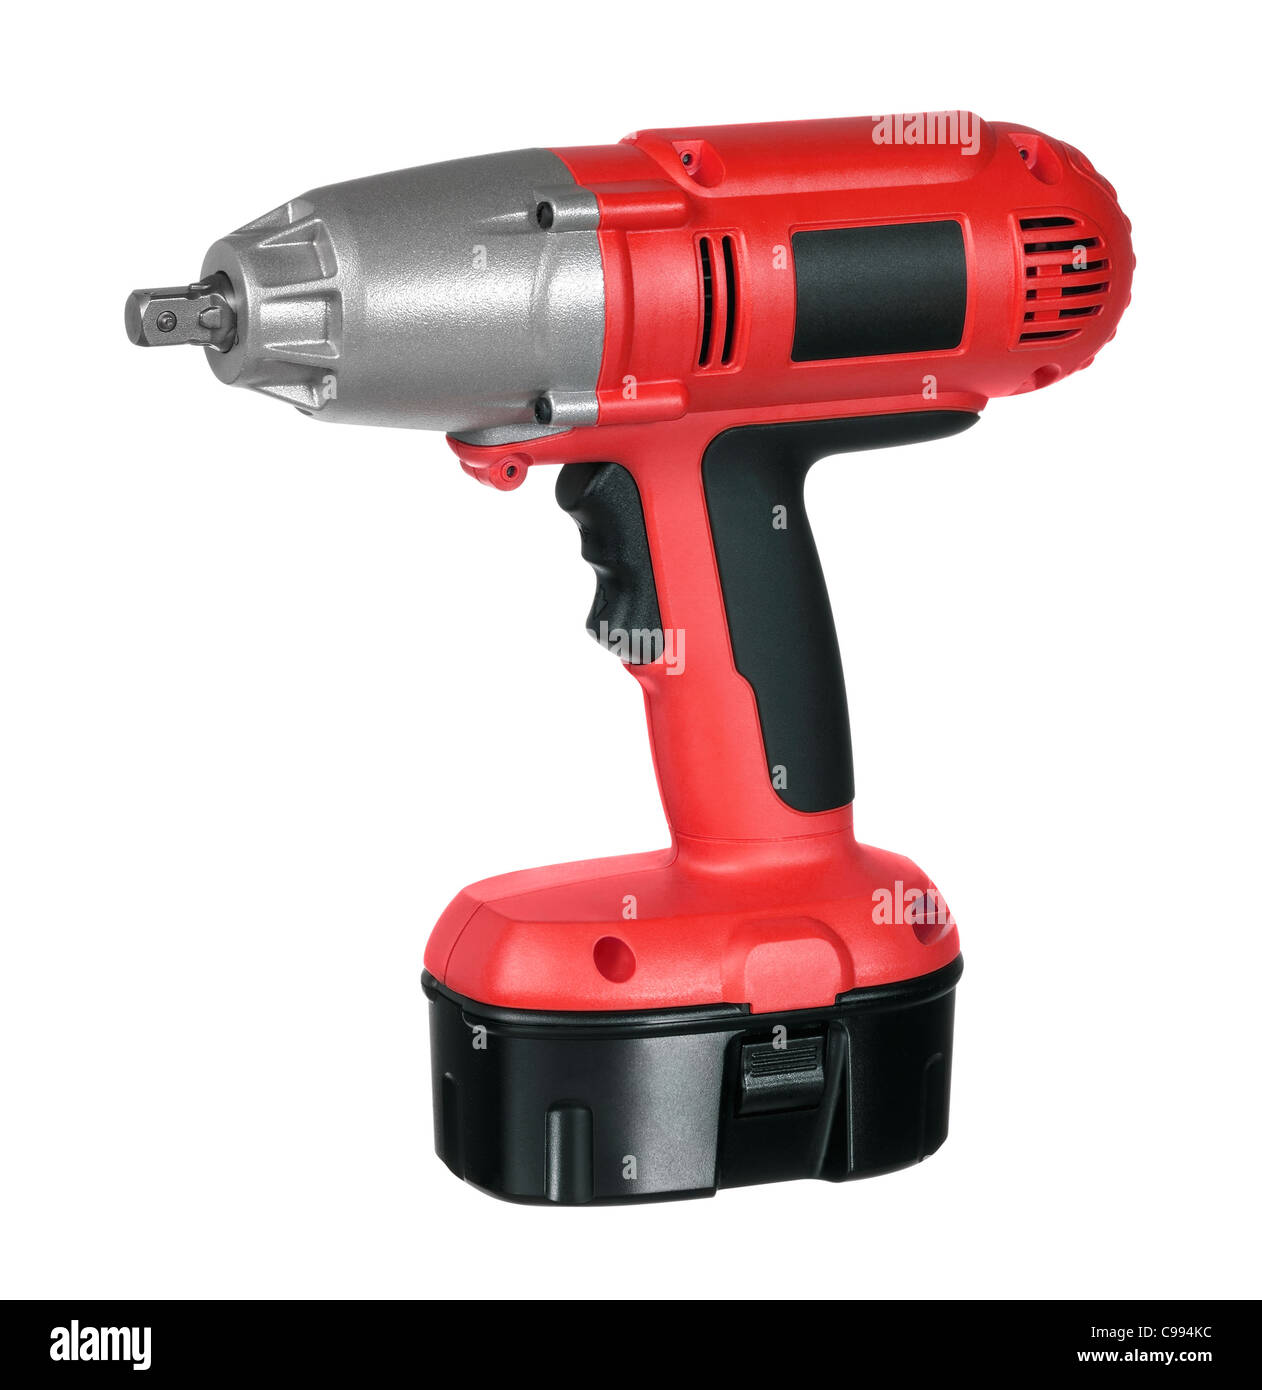 Portable electric drill Cut Out Stock Images & Pictures - Alamy